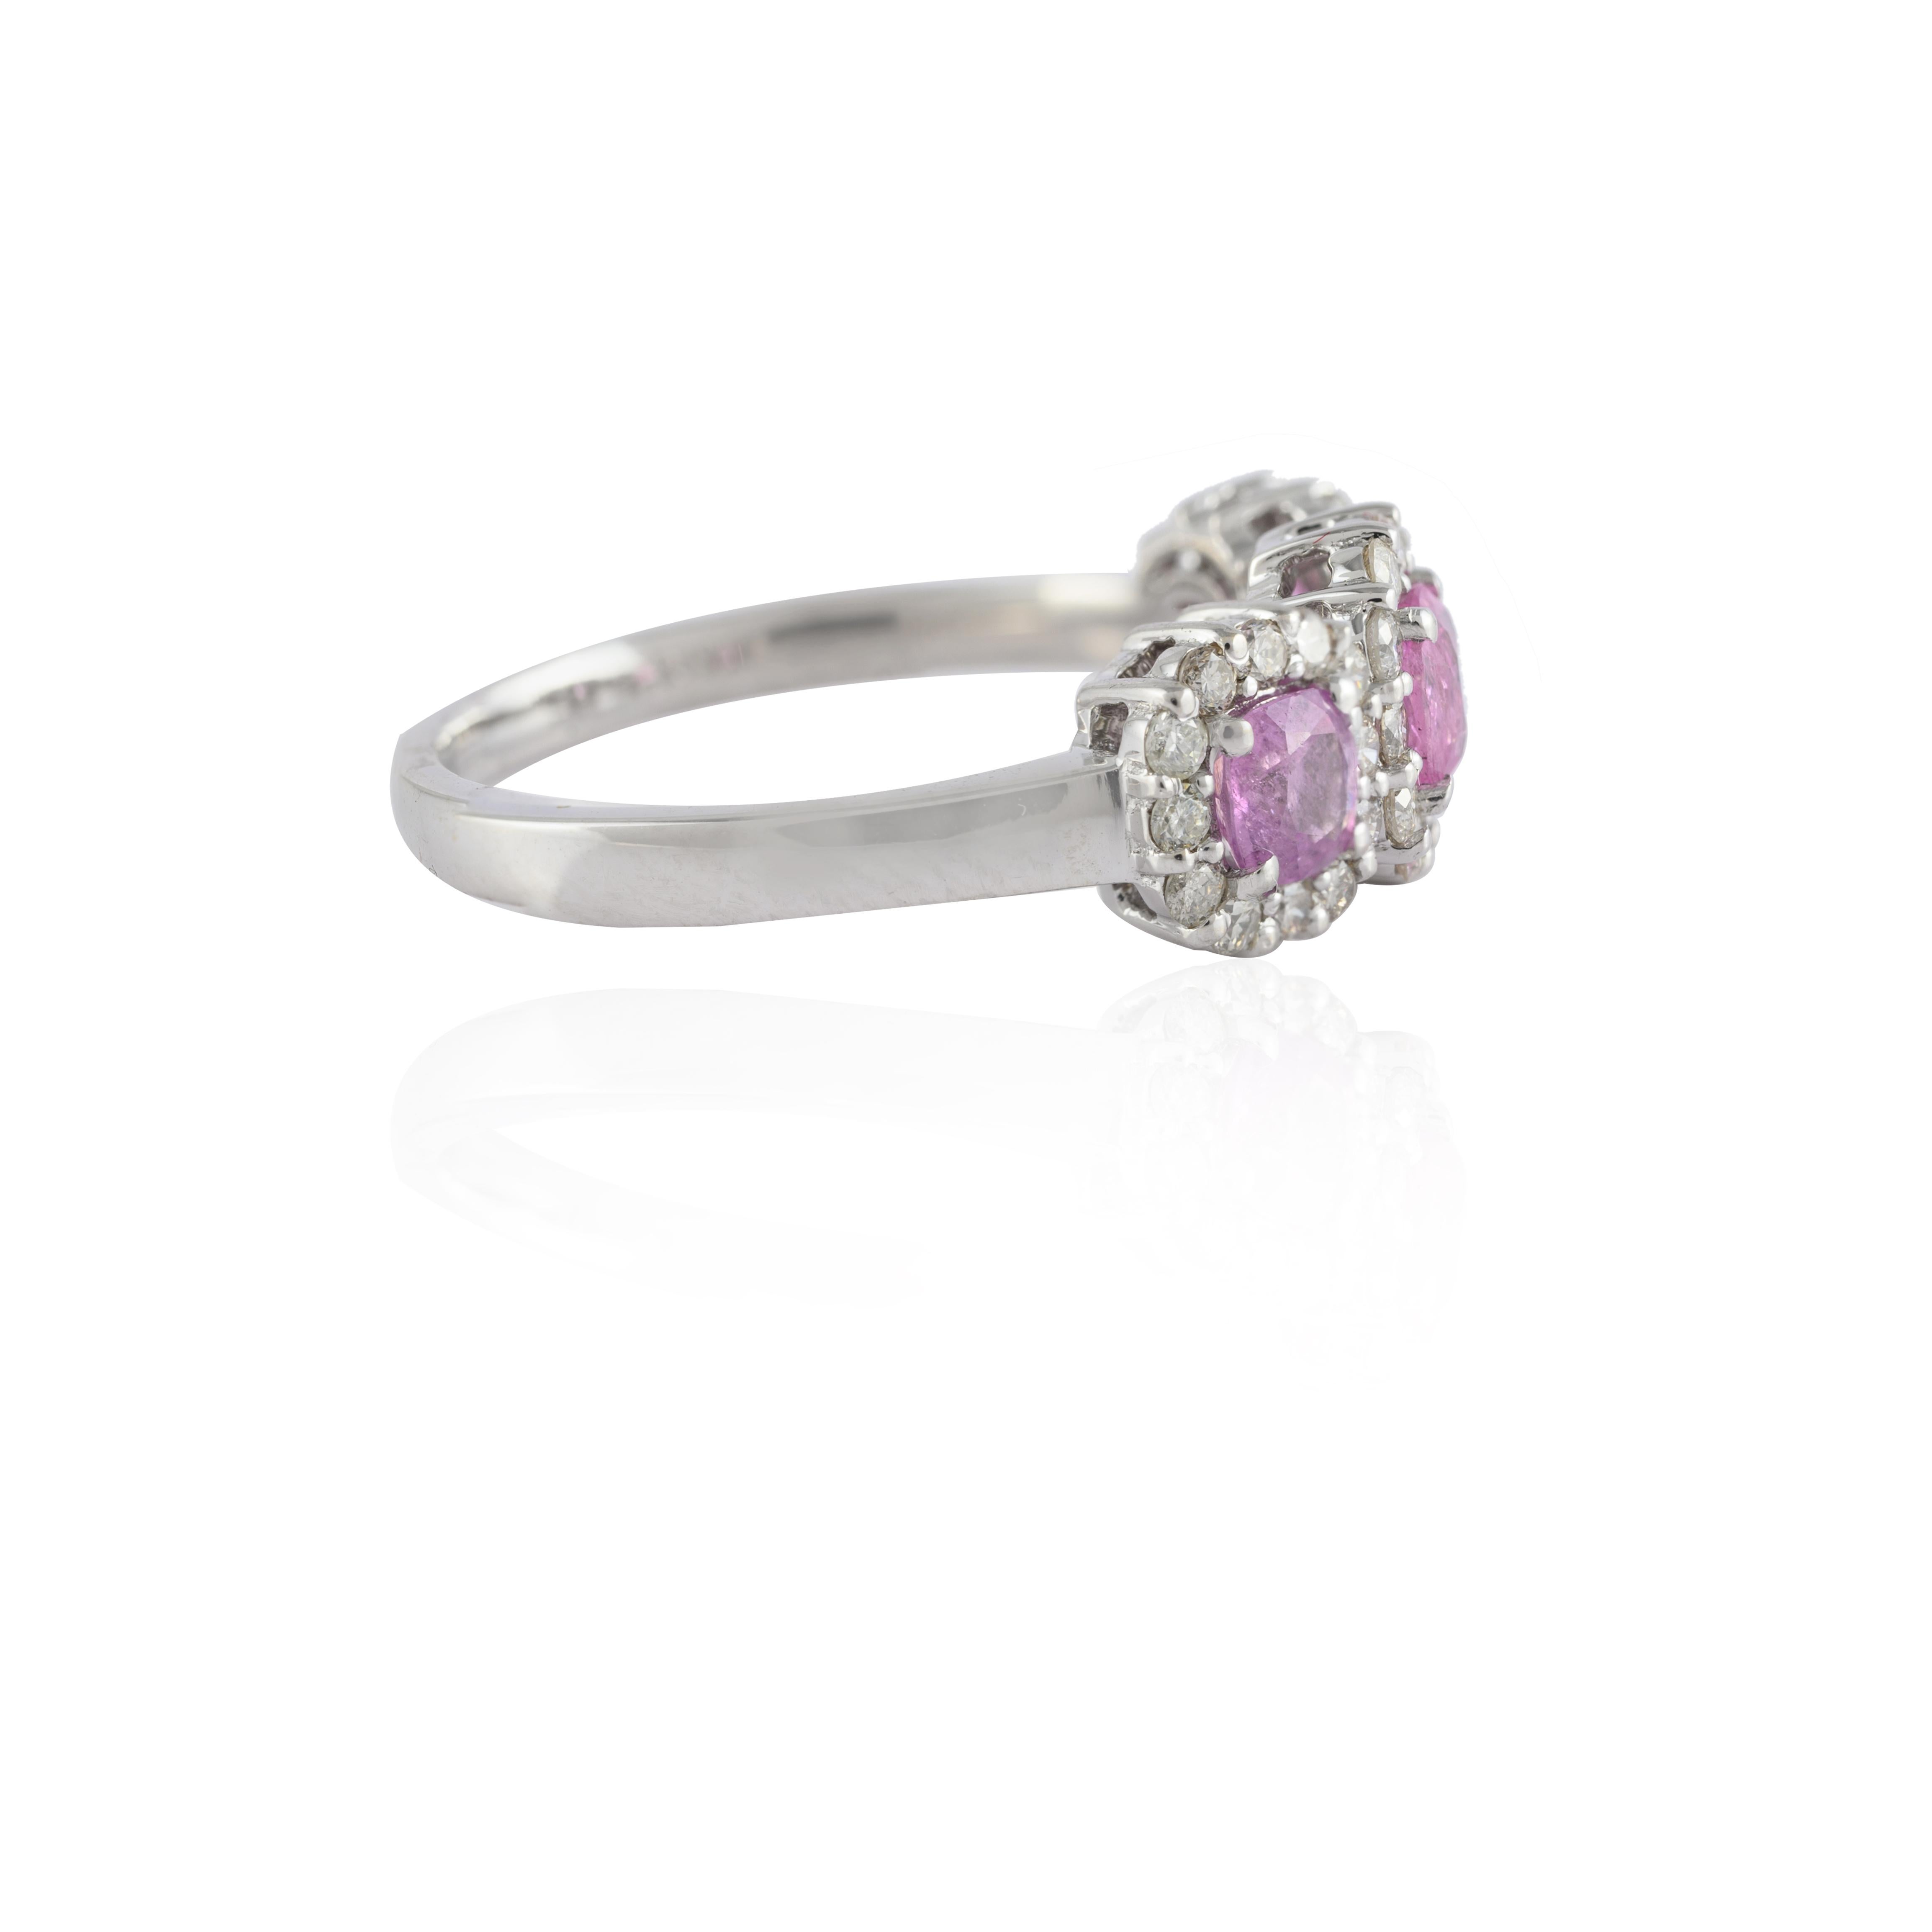 For Sale:  Pink Sapphire Diamond Halo Three-Stone Engagement Ring in 14k Solid White Gold 6